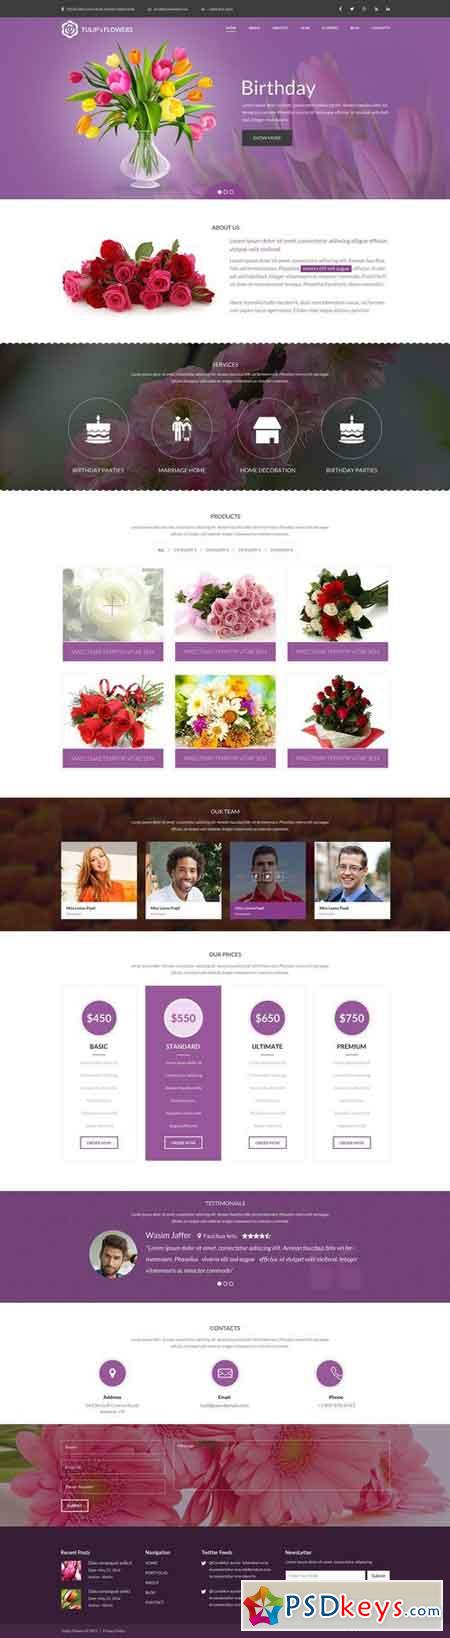 One Page Flower PSD Website Template 2346375